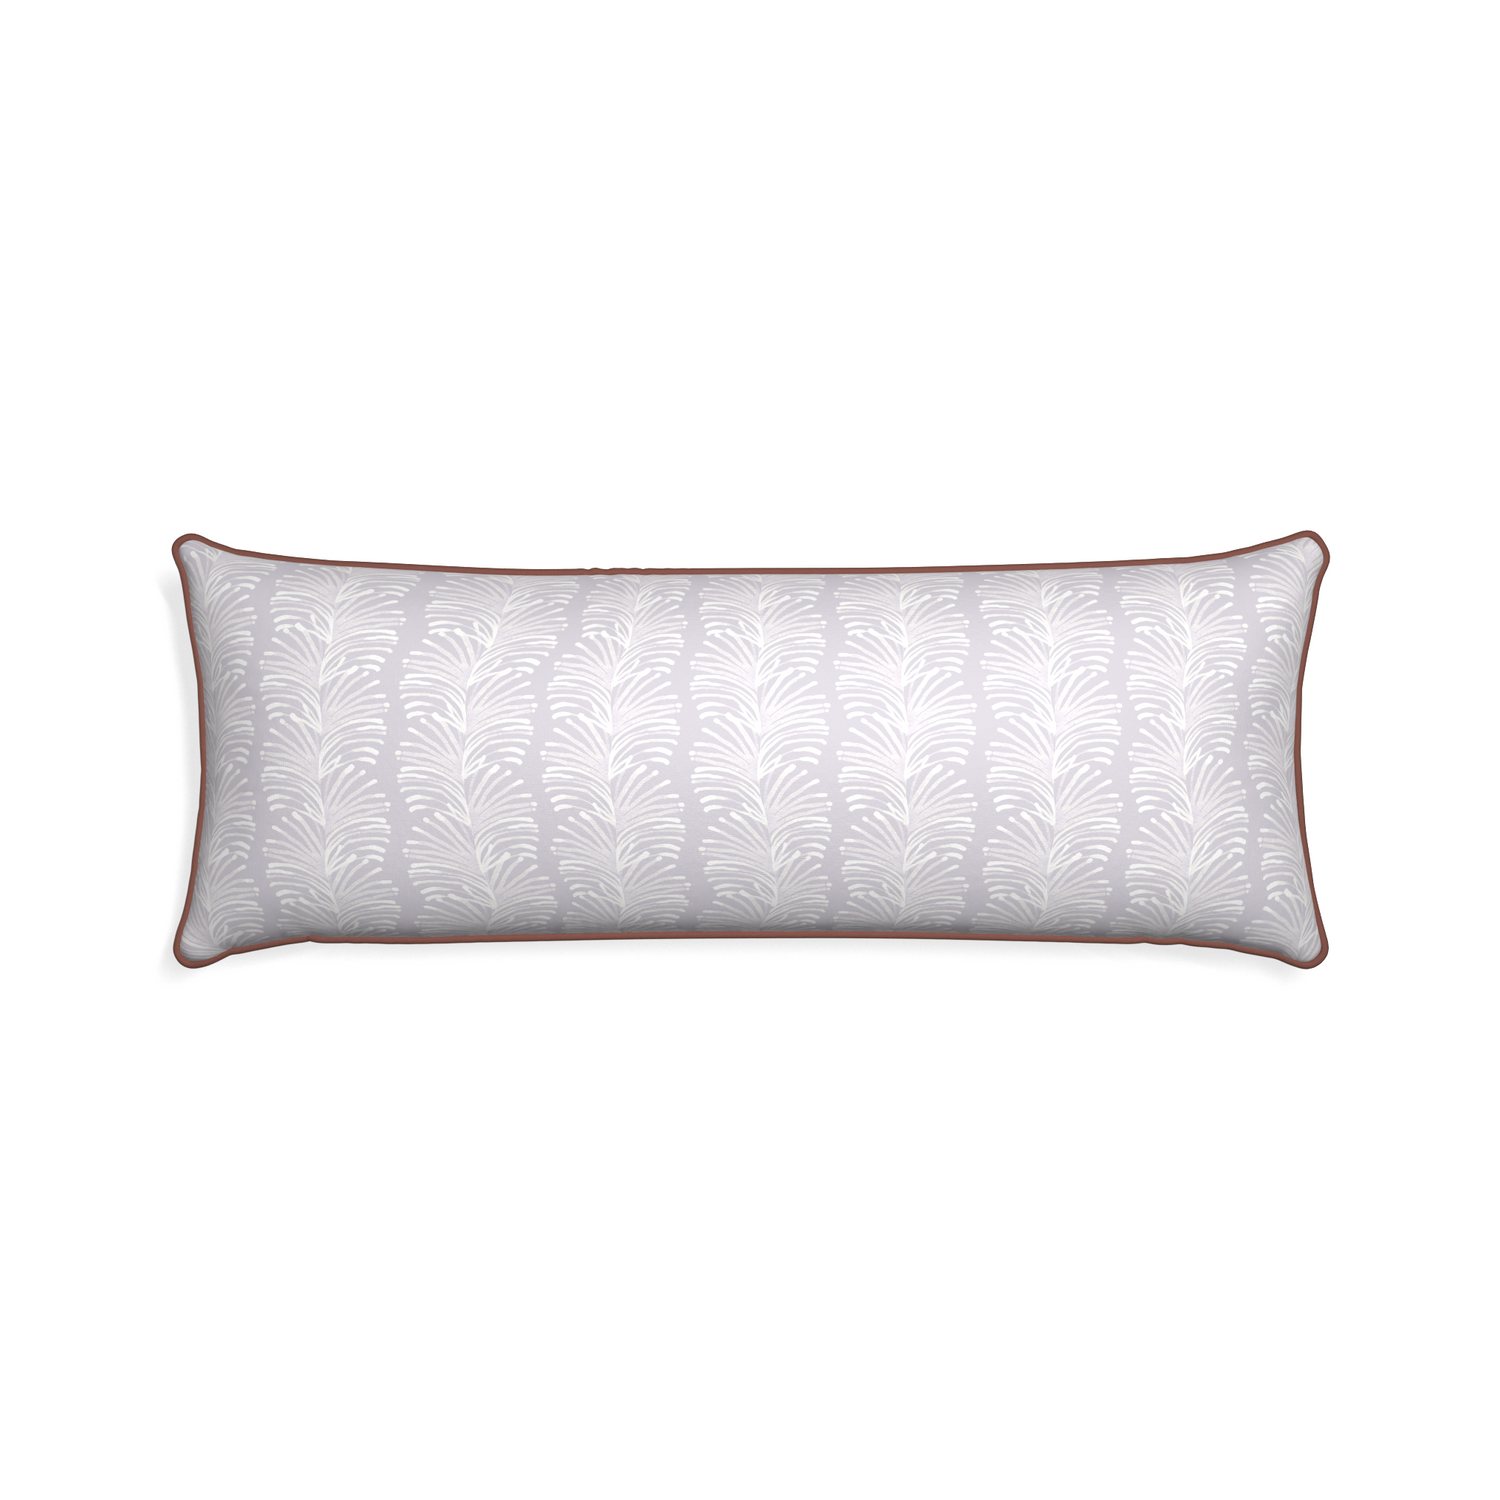 Xl-lumbar emma lavender custom lavender botanical stripepillow with w piping on white background